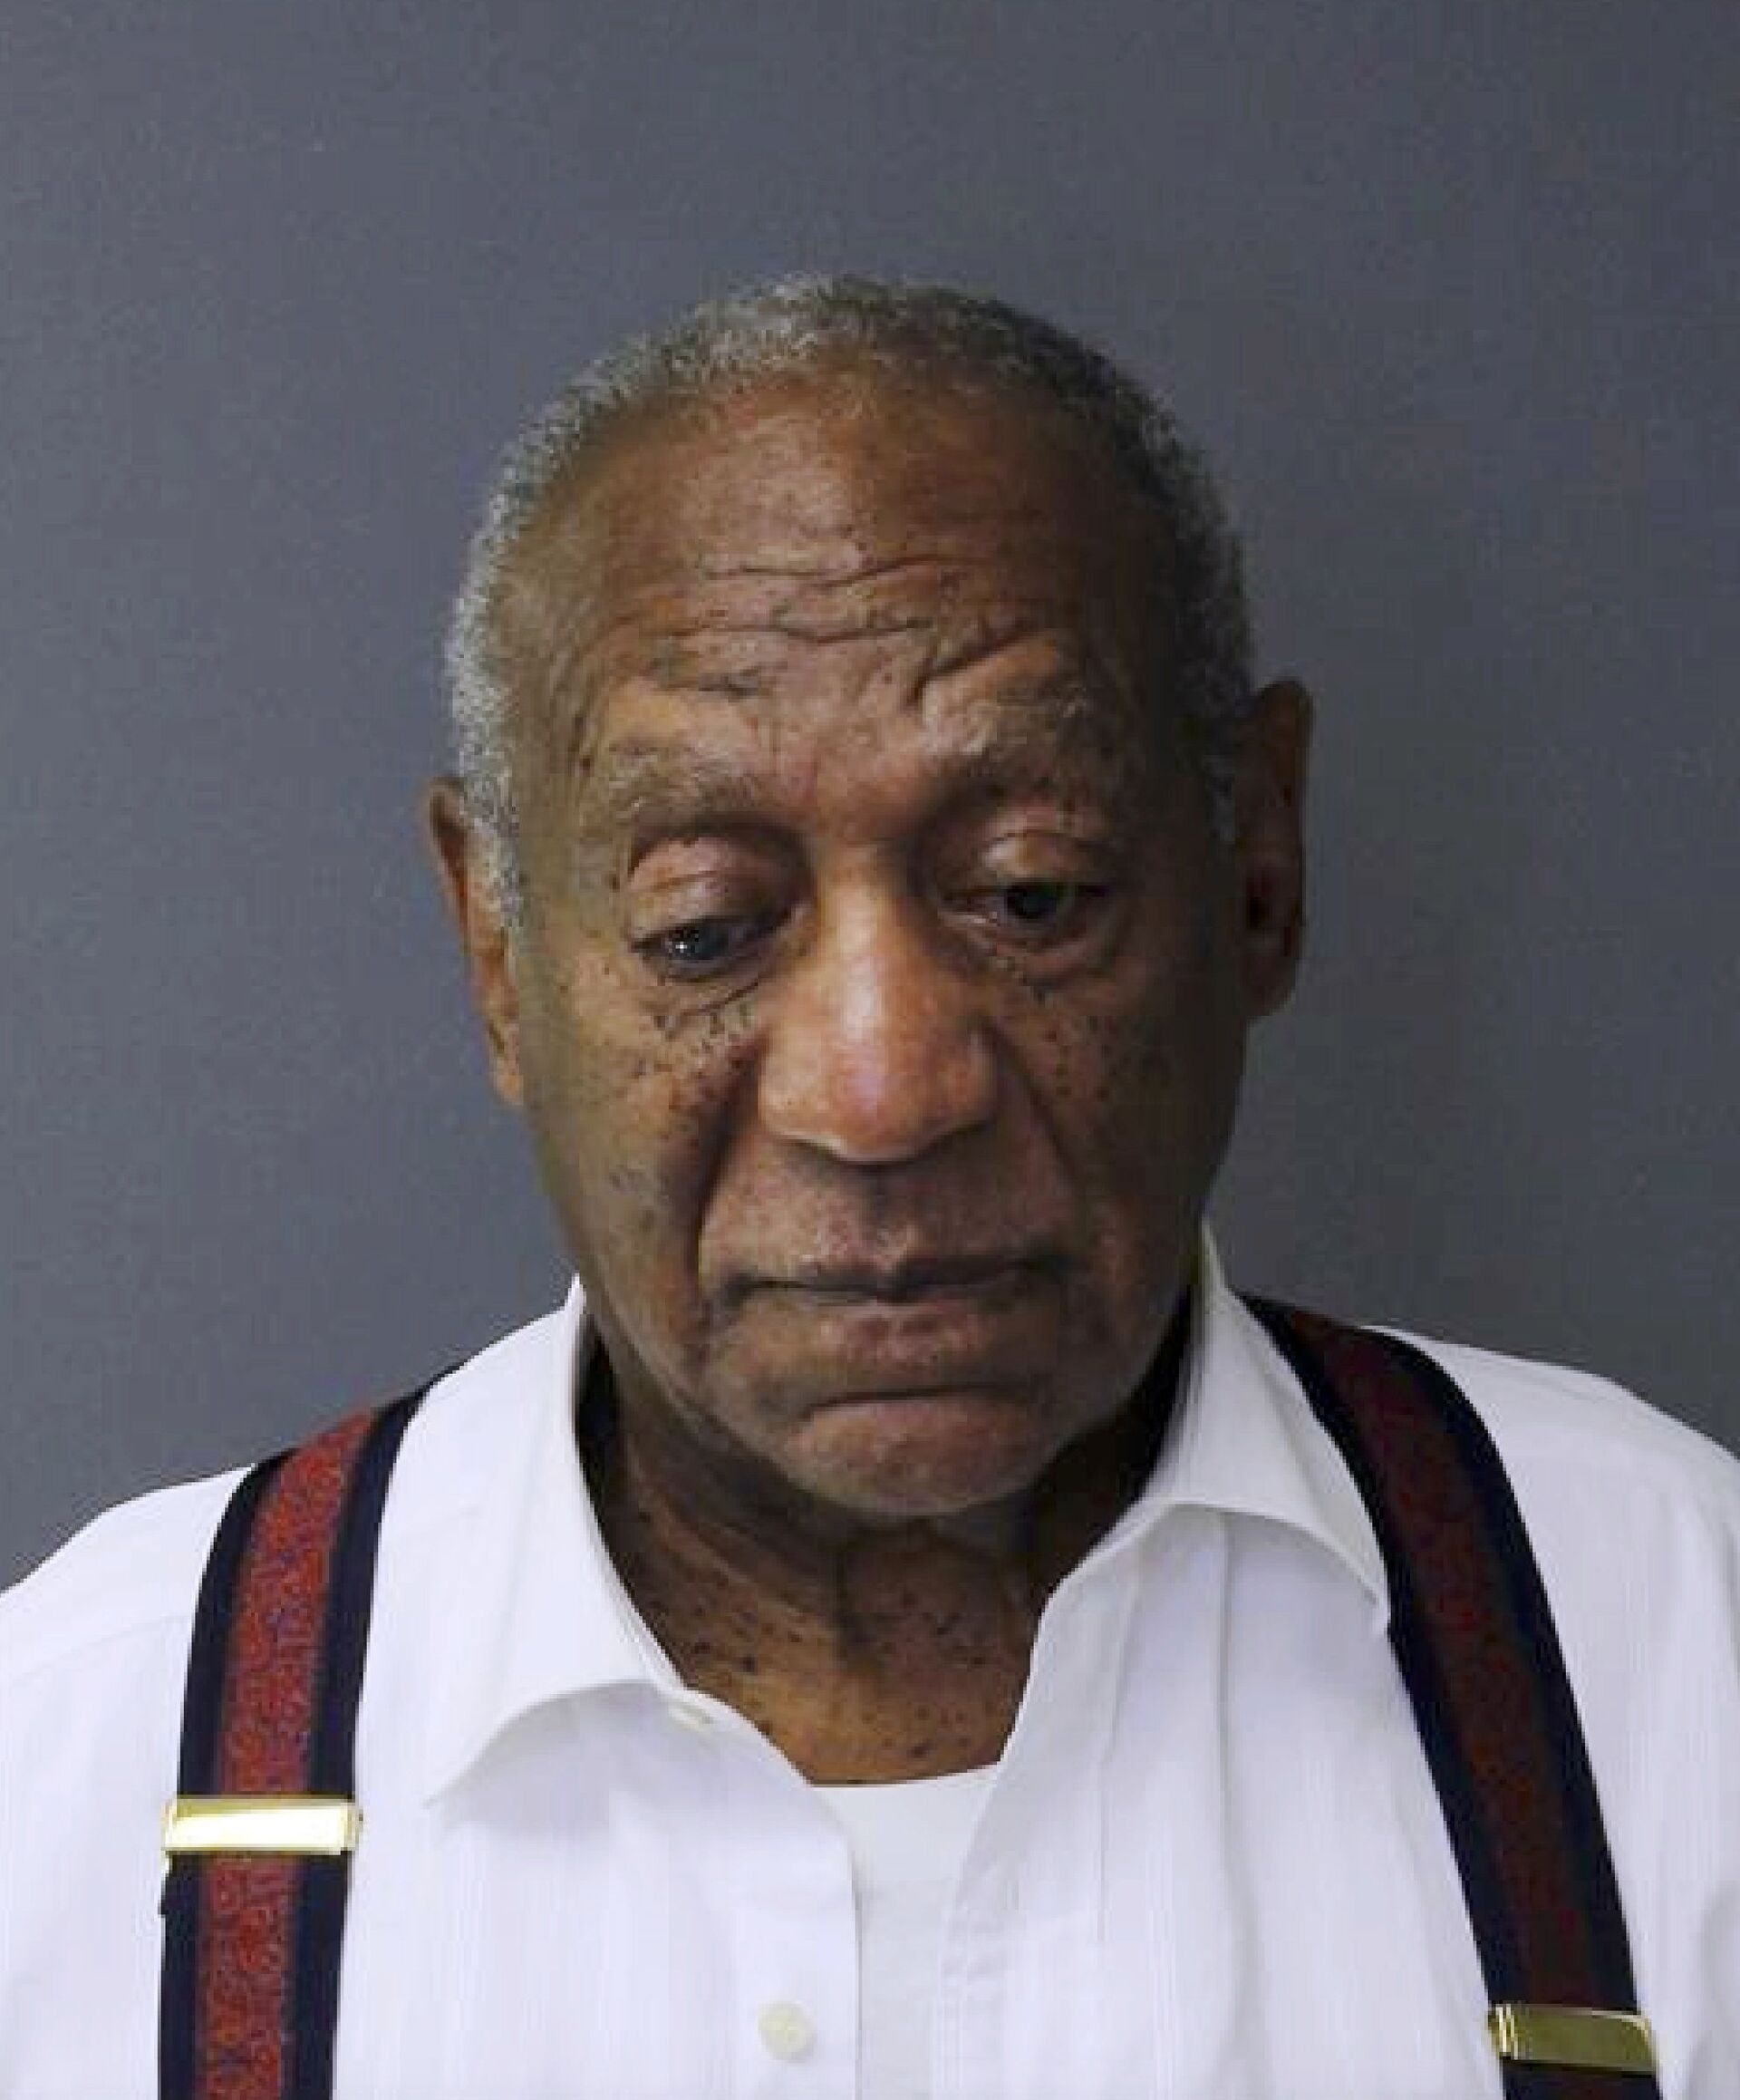 Bill Cosby Denied Parole, Required to Complete Additional Programmes for Sex Offenders, Reports Say - Sputnik International, 1920, 28.05.2021